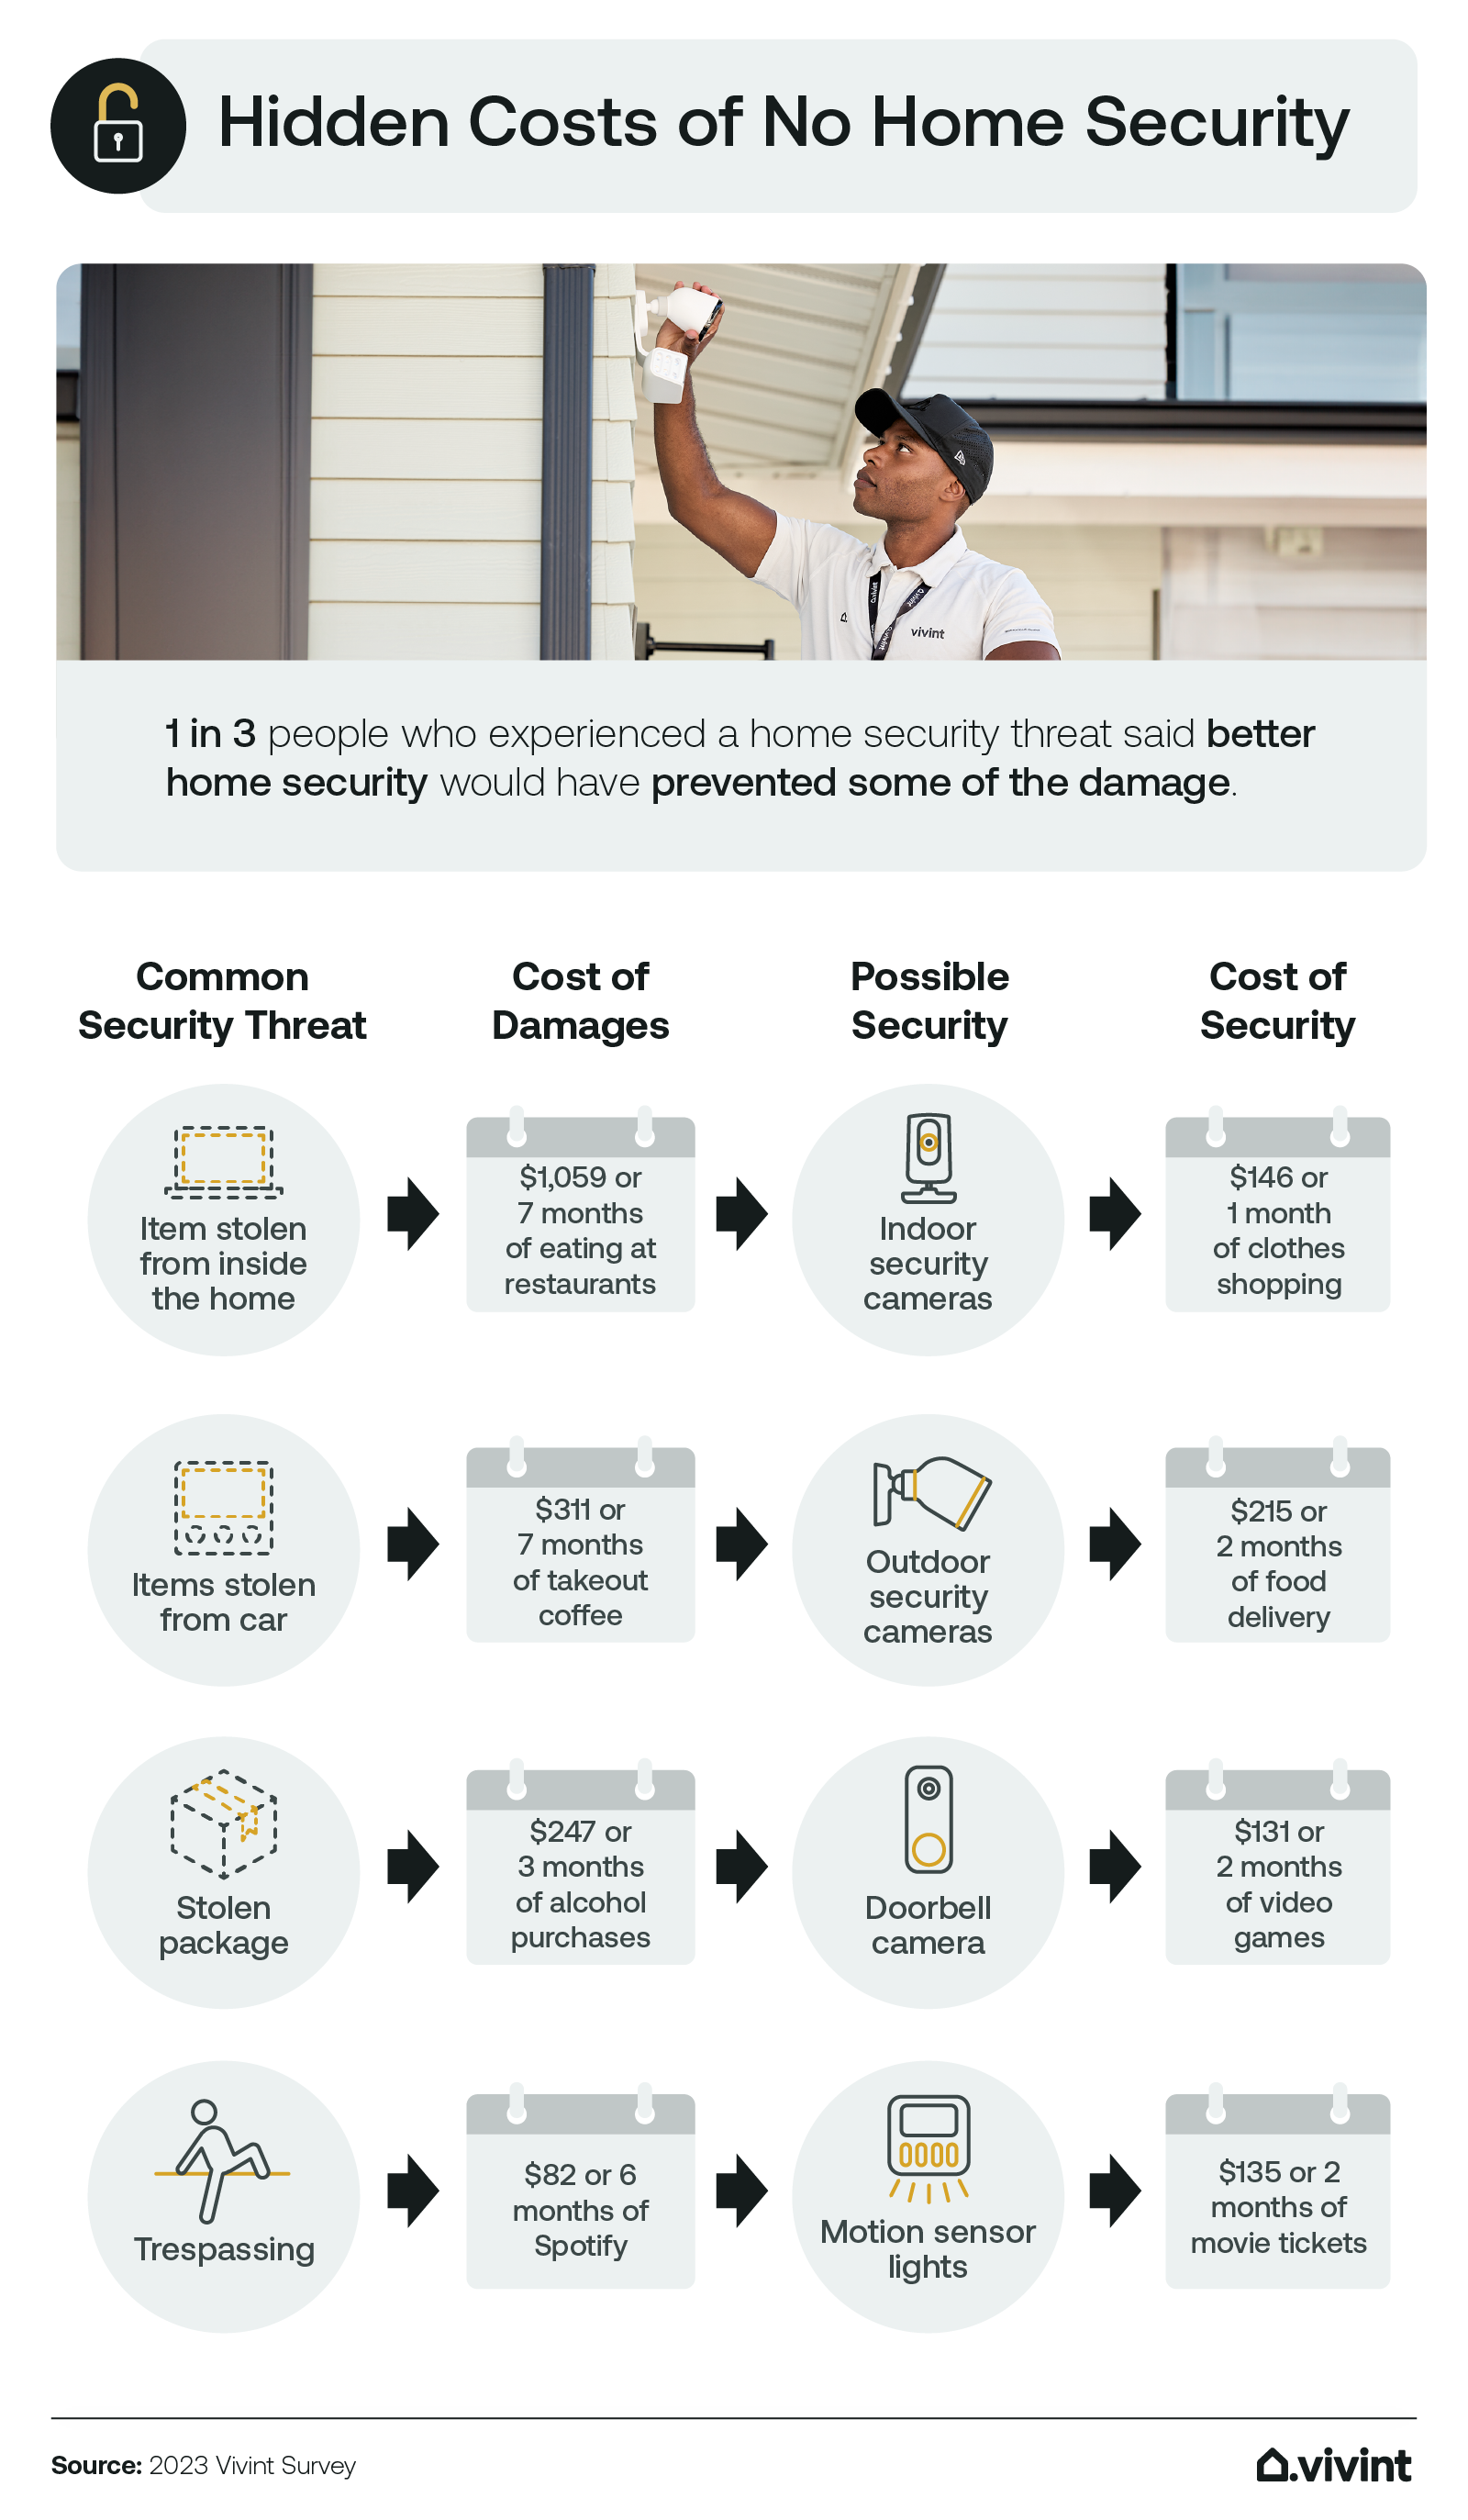 Information about the hidden costs of not having a home security system.